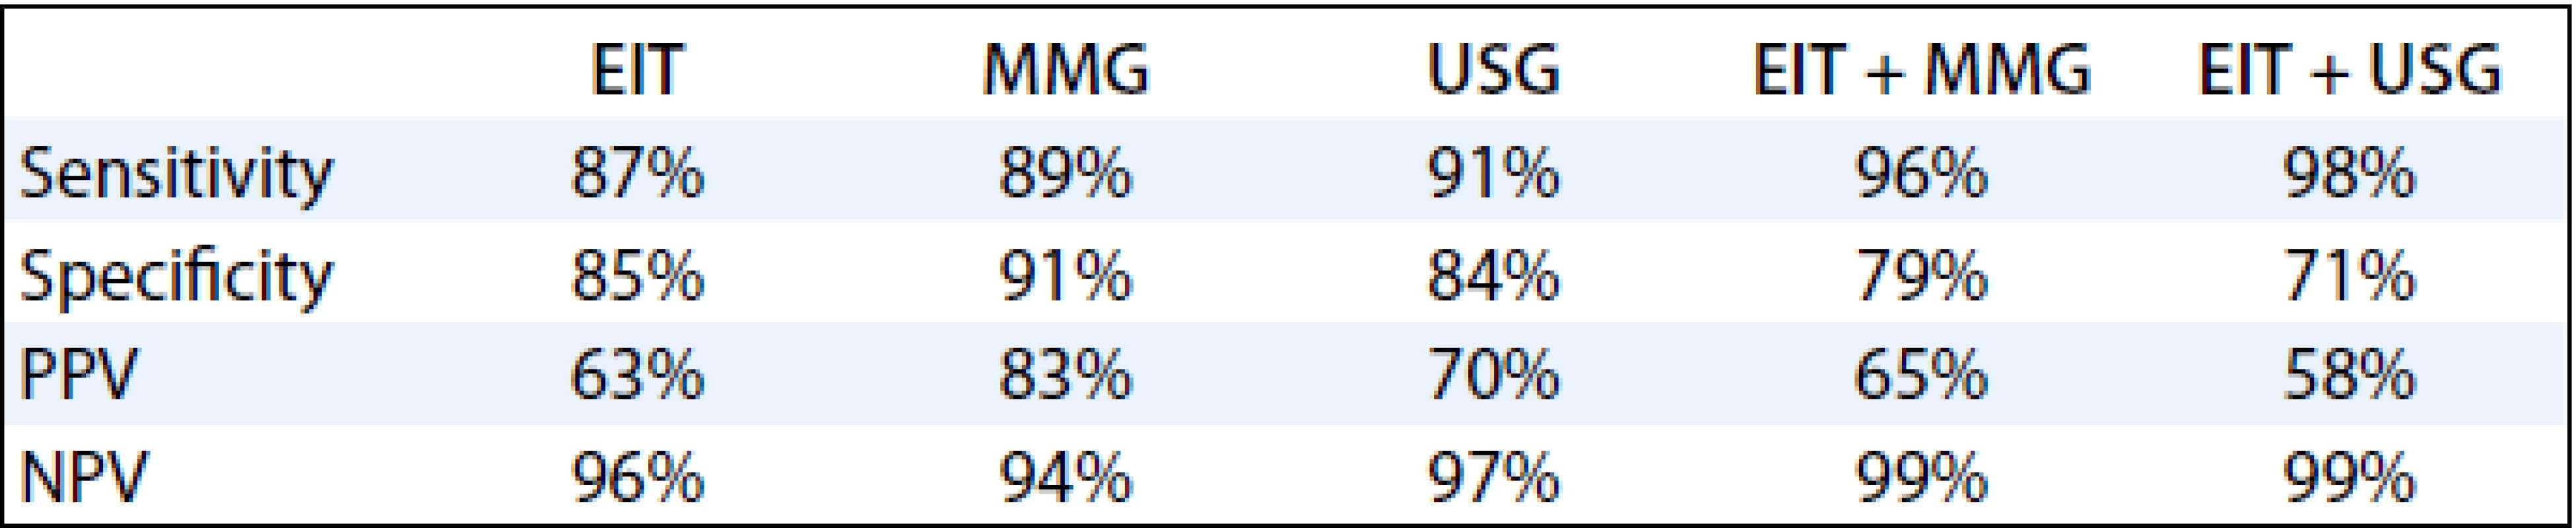 Statistical data for EIT, MG, USG alone and in combination EIT + MG and EIT + USG.